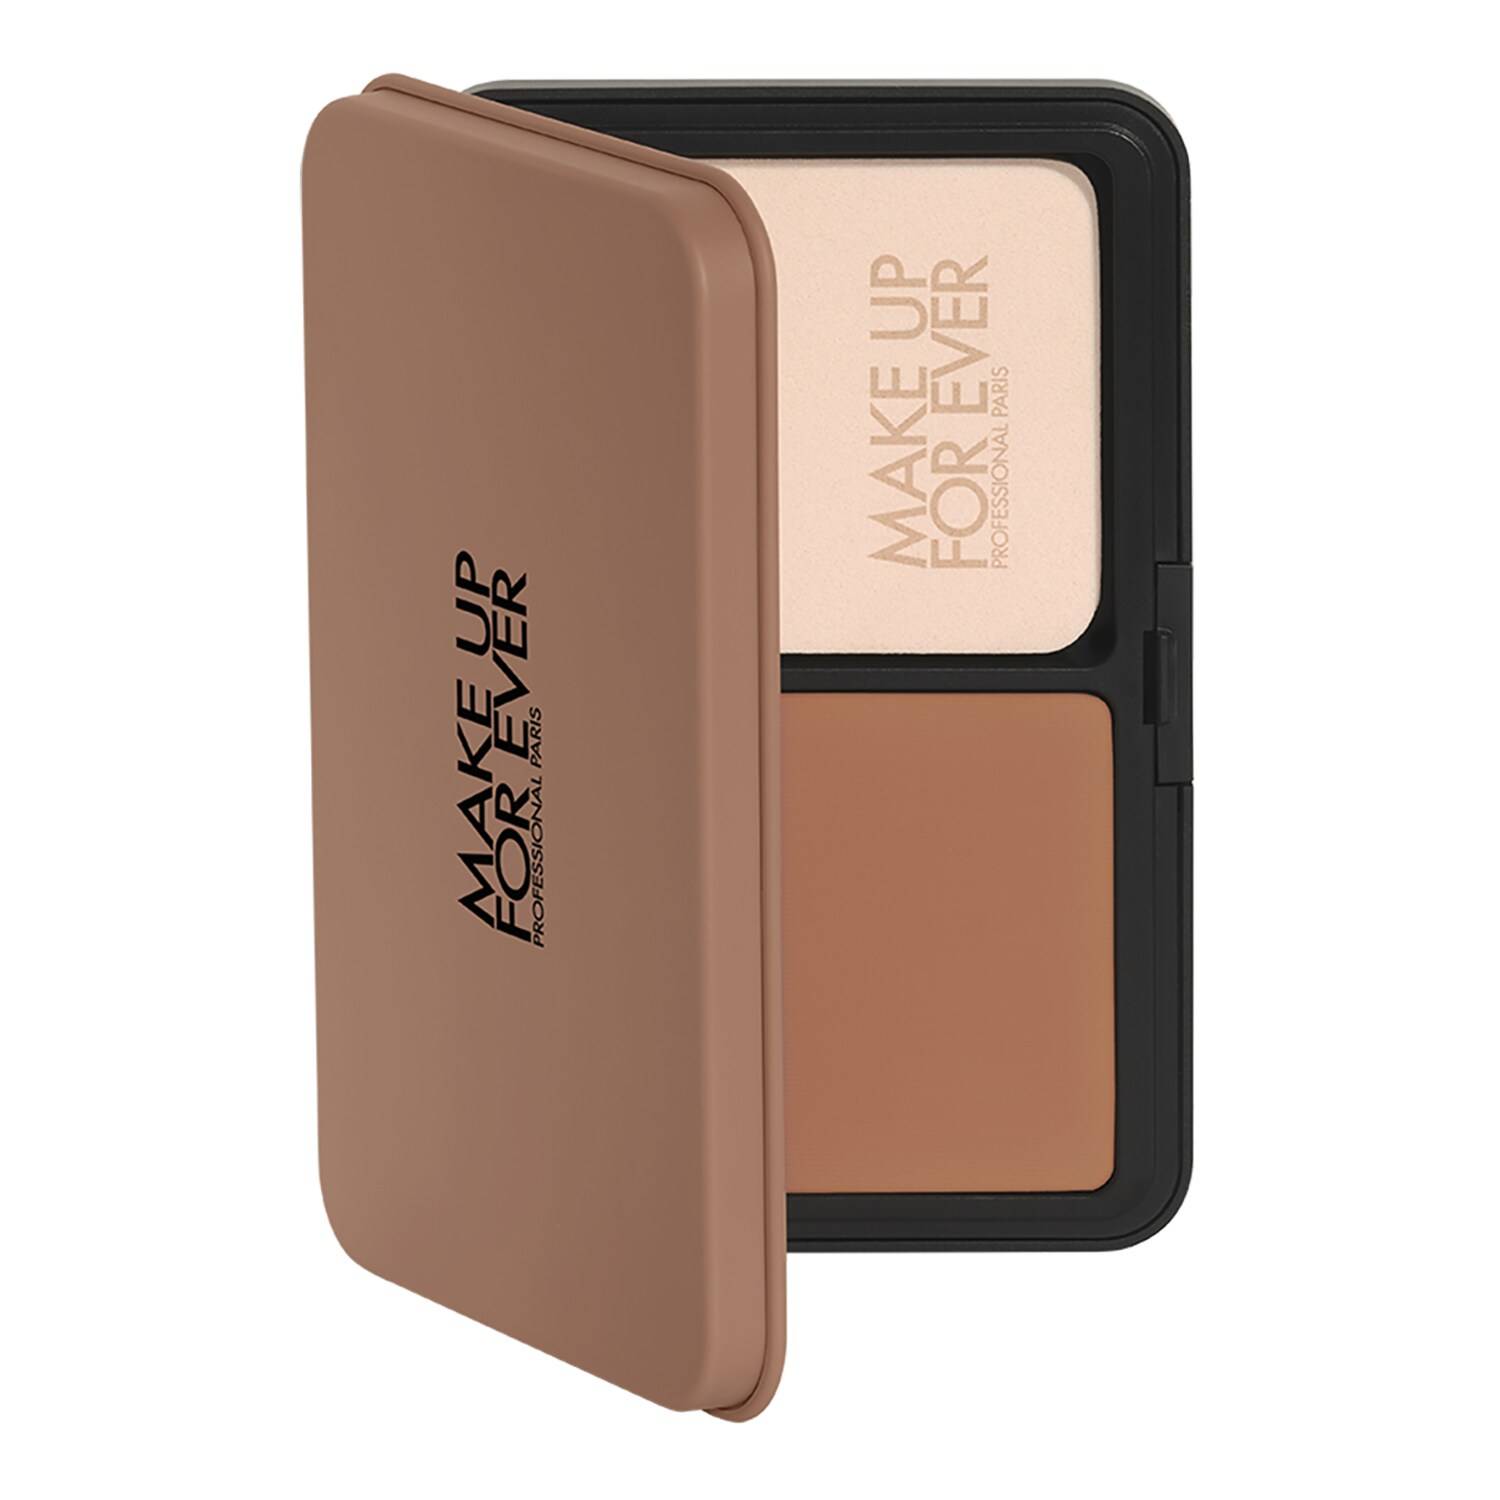 Make Up For Ever Hd Skin Powder Foundation 11G 4R63 - Cool Pecan